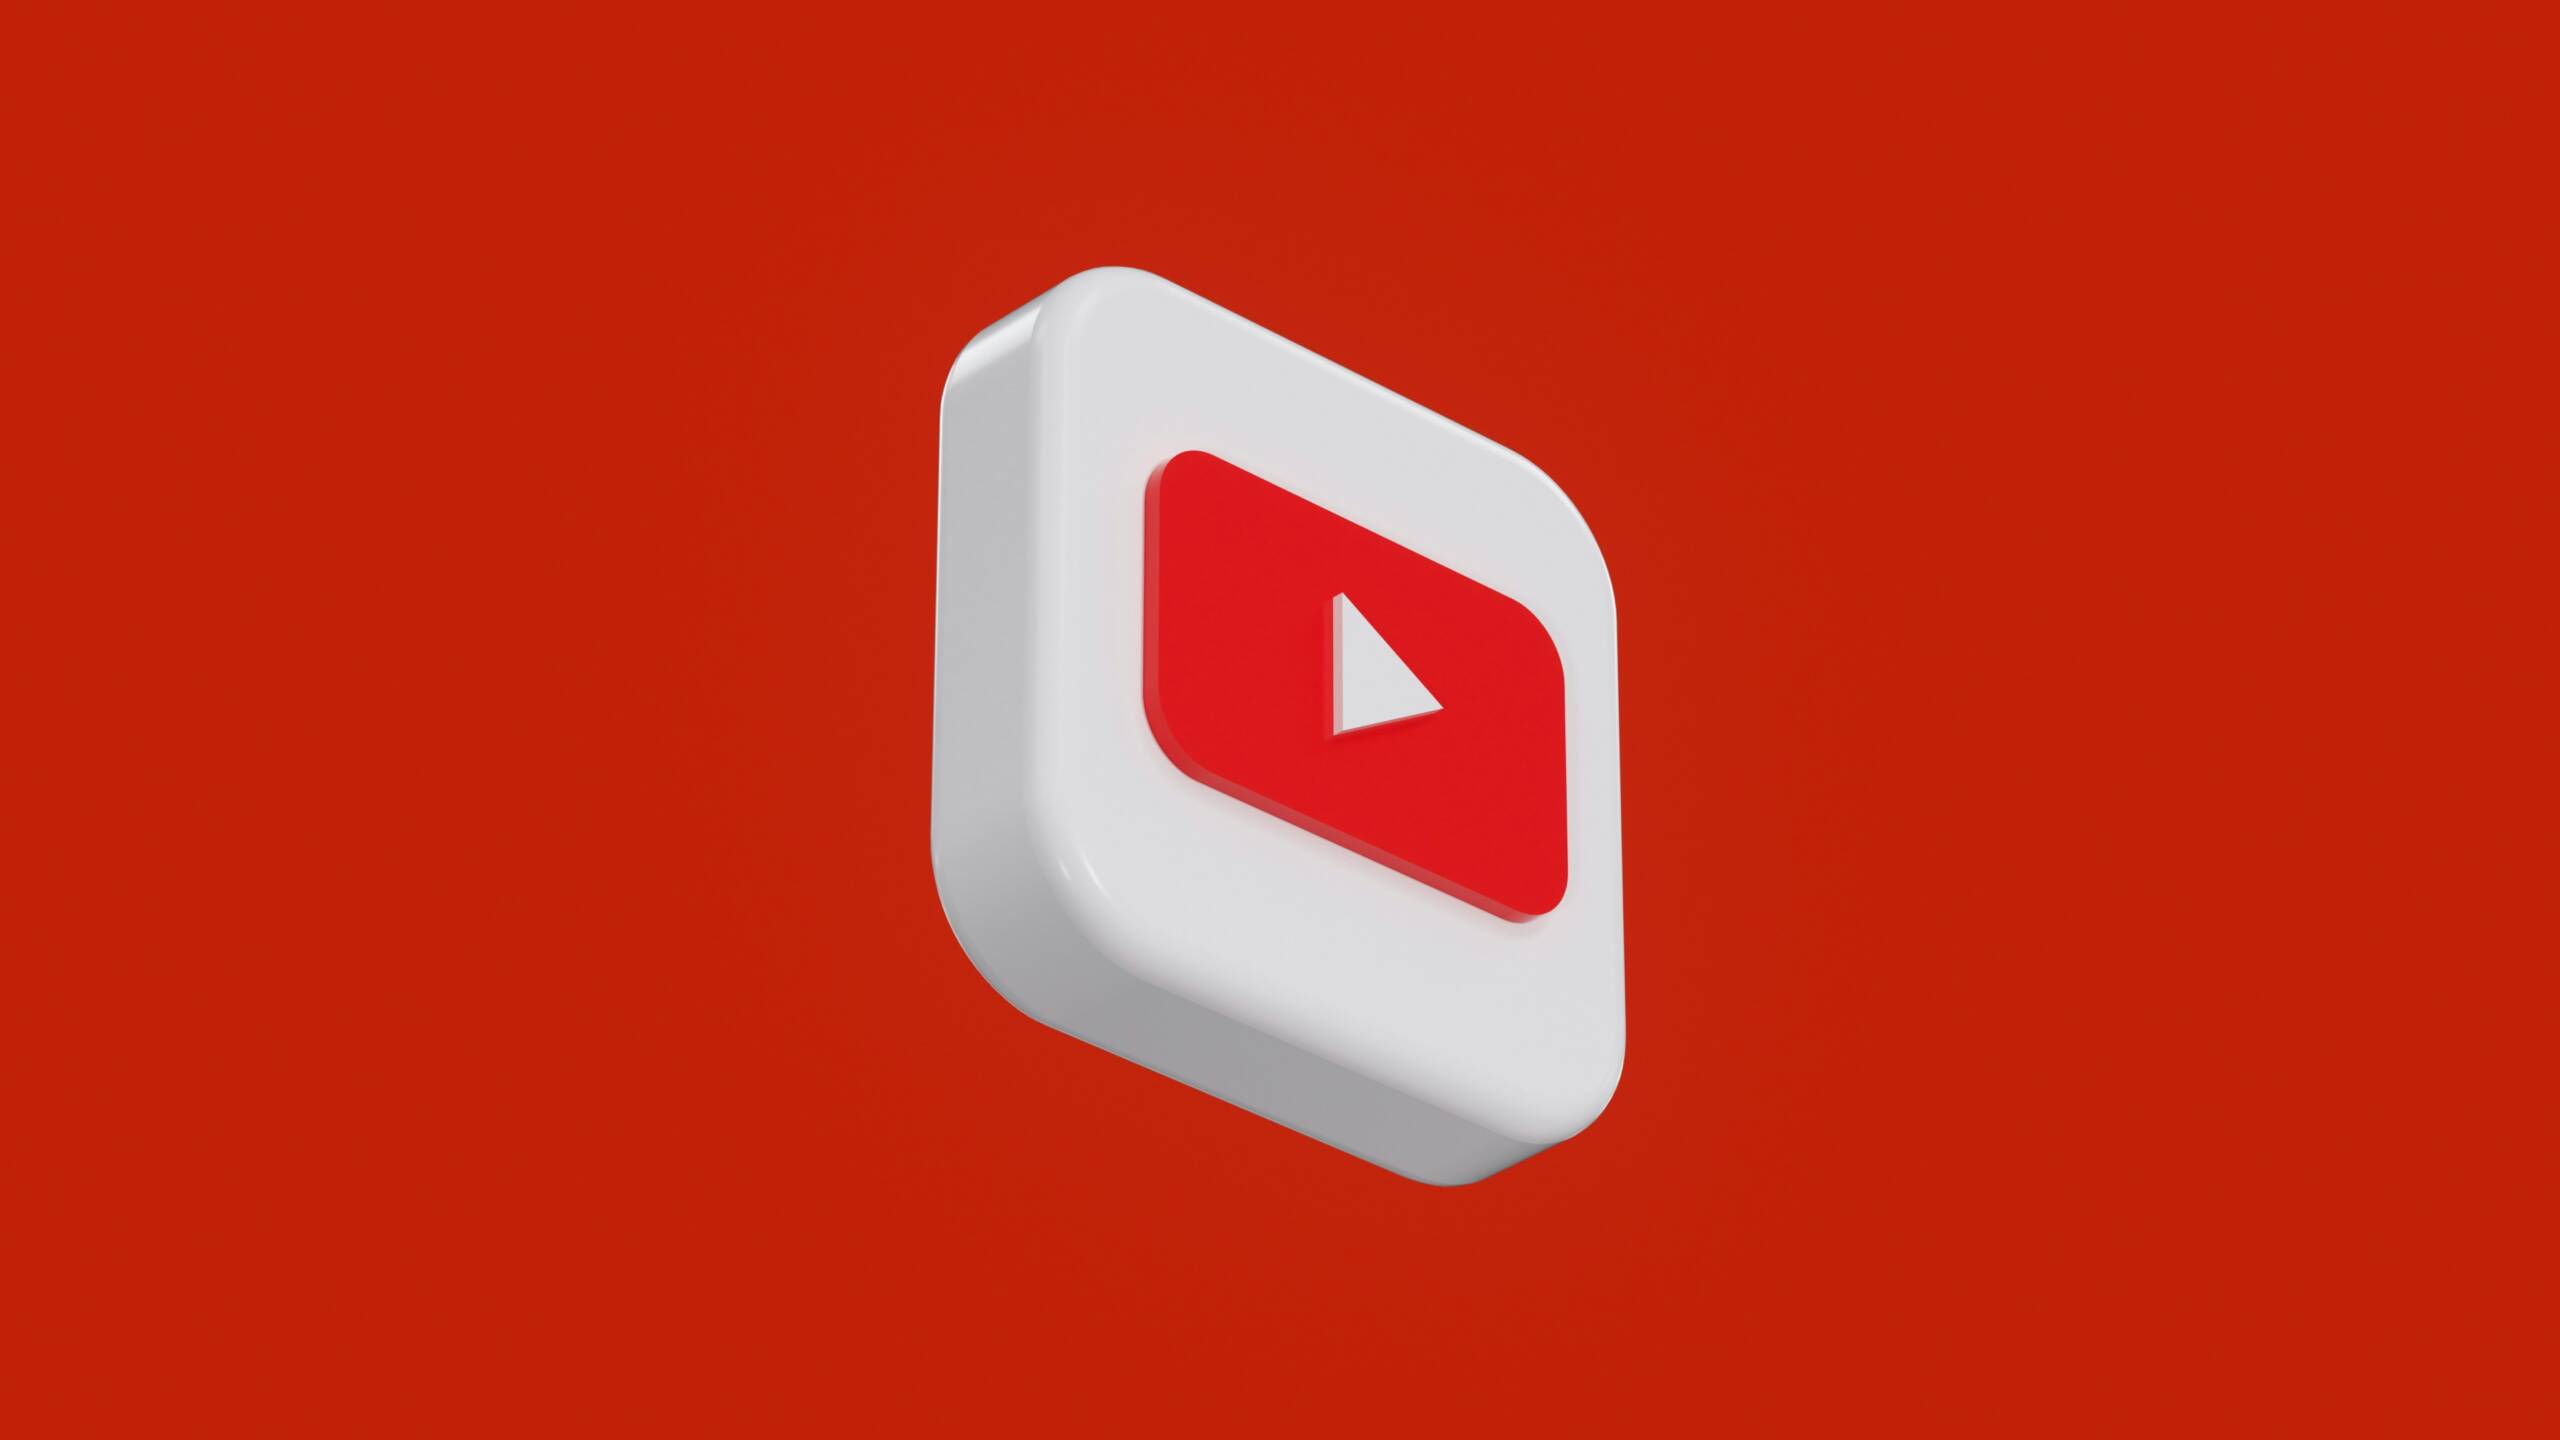 YouTube logo on a red background.